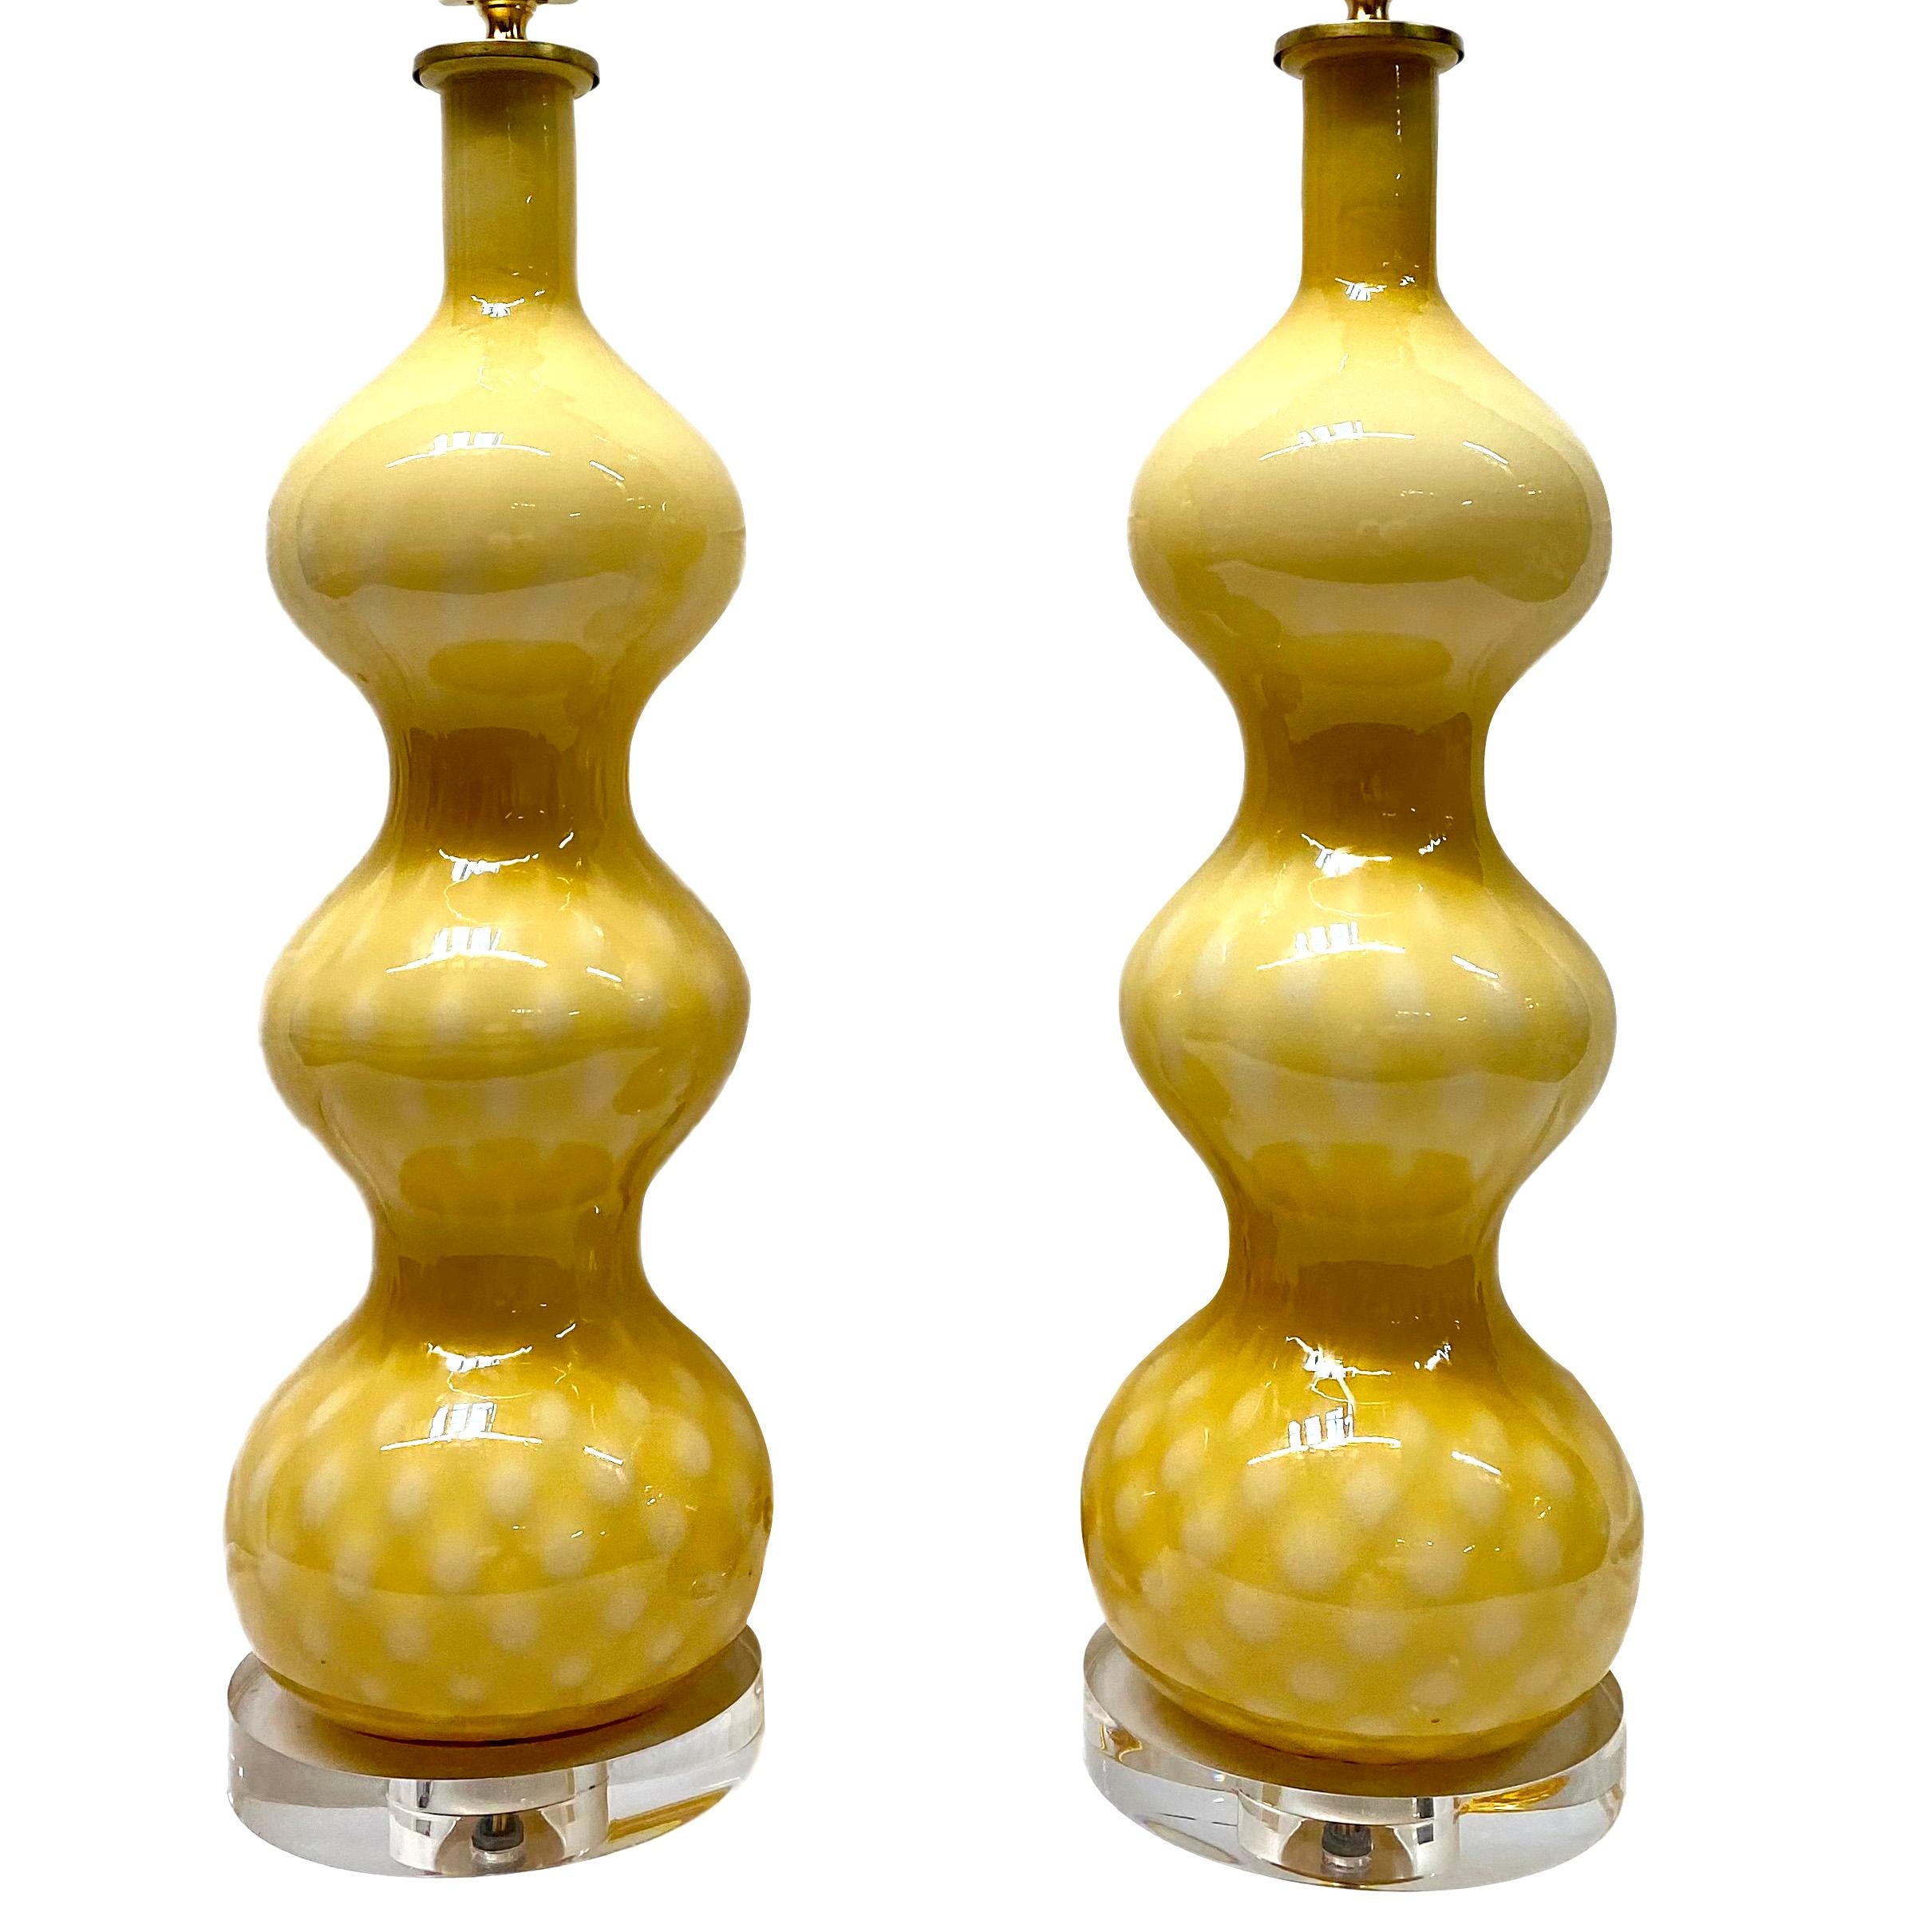 Pair of circa 1950's Italian blown murano glass table lamps with lucite bases.

Measurements:
Height of body: 19.5